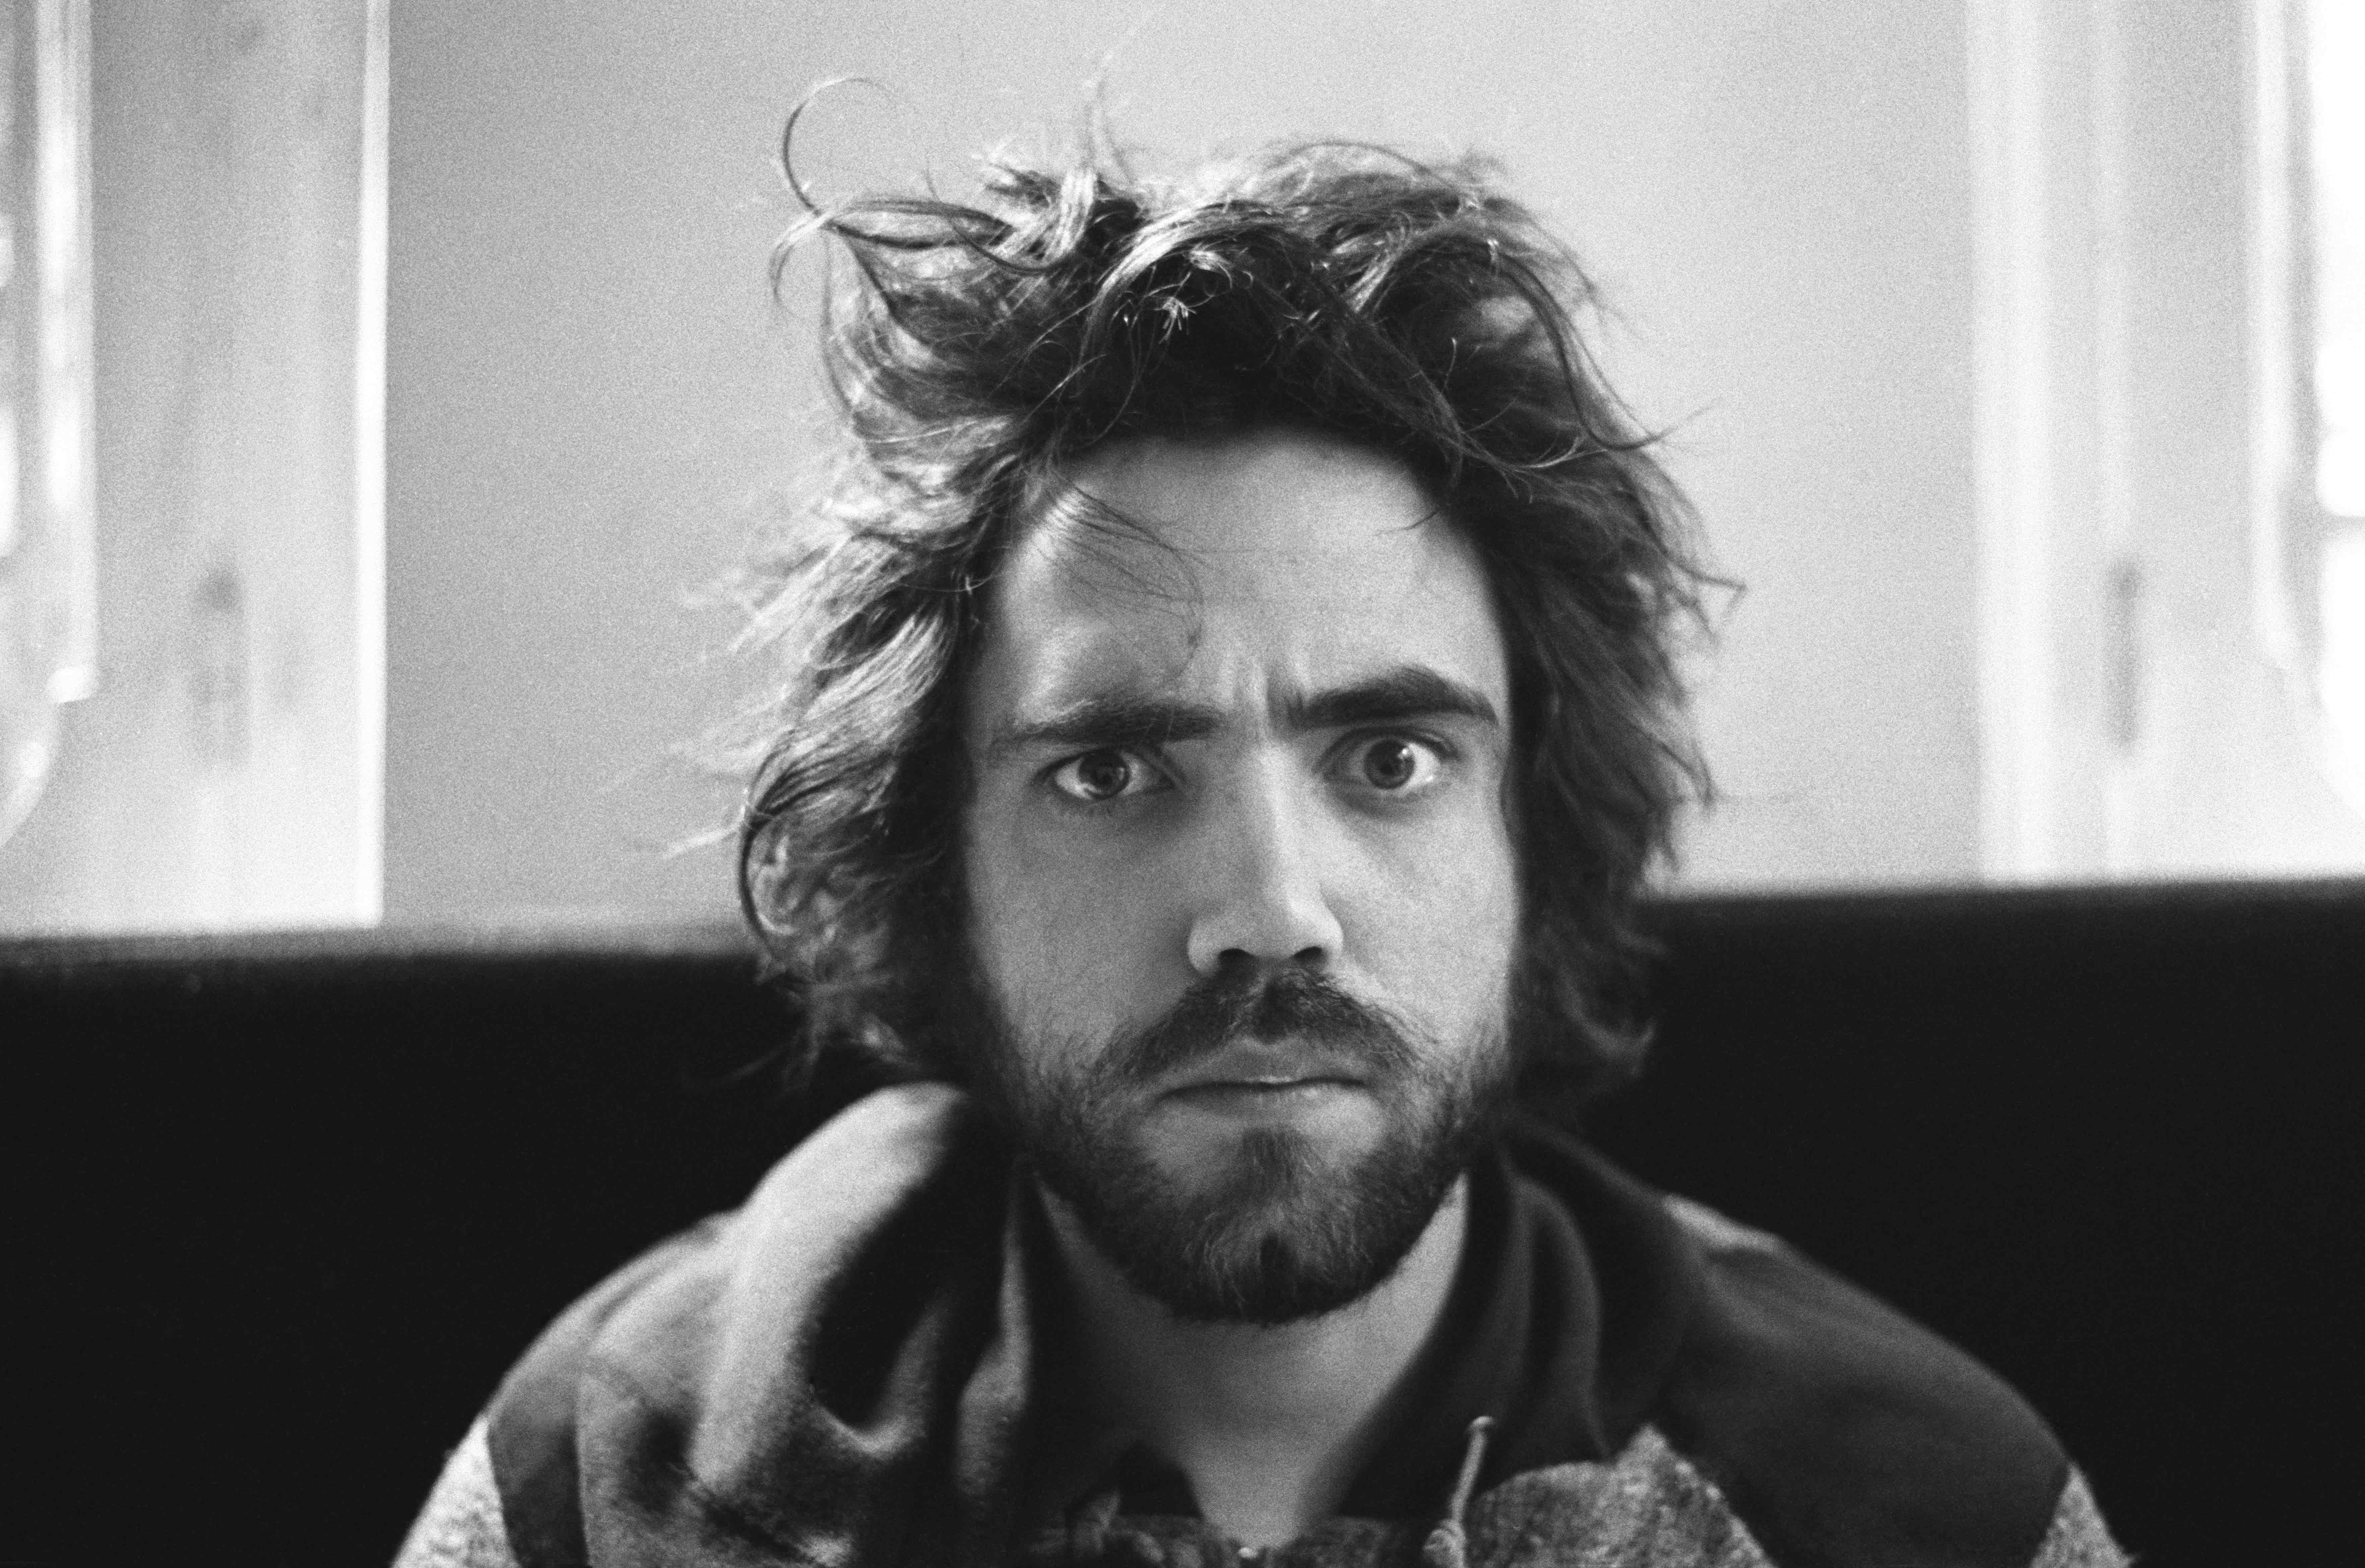 Patrick Watson: “You could look at music as an escape or as a way of colouring in your life”